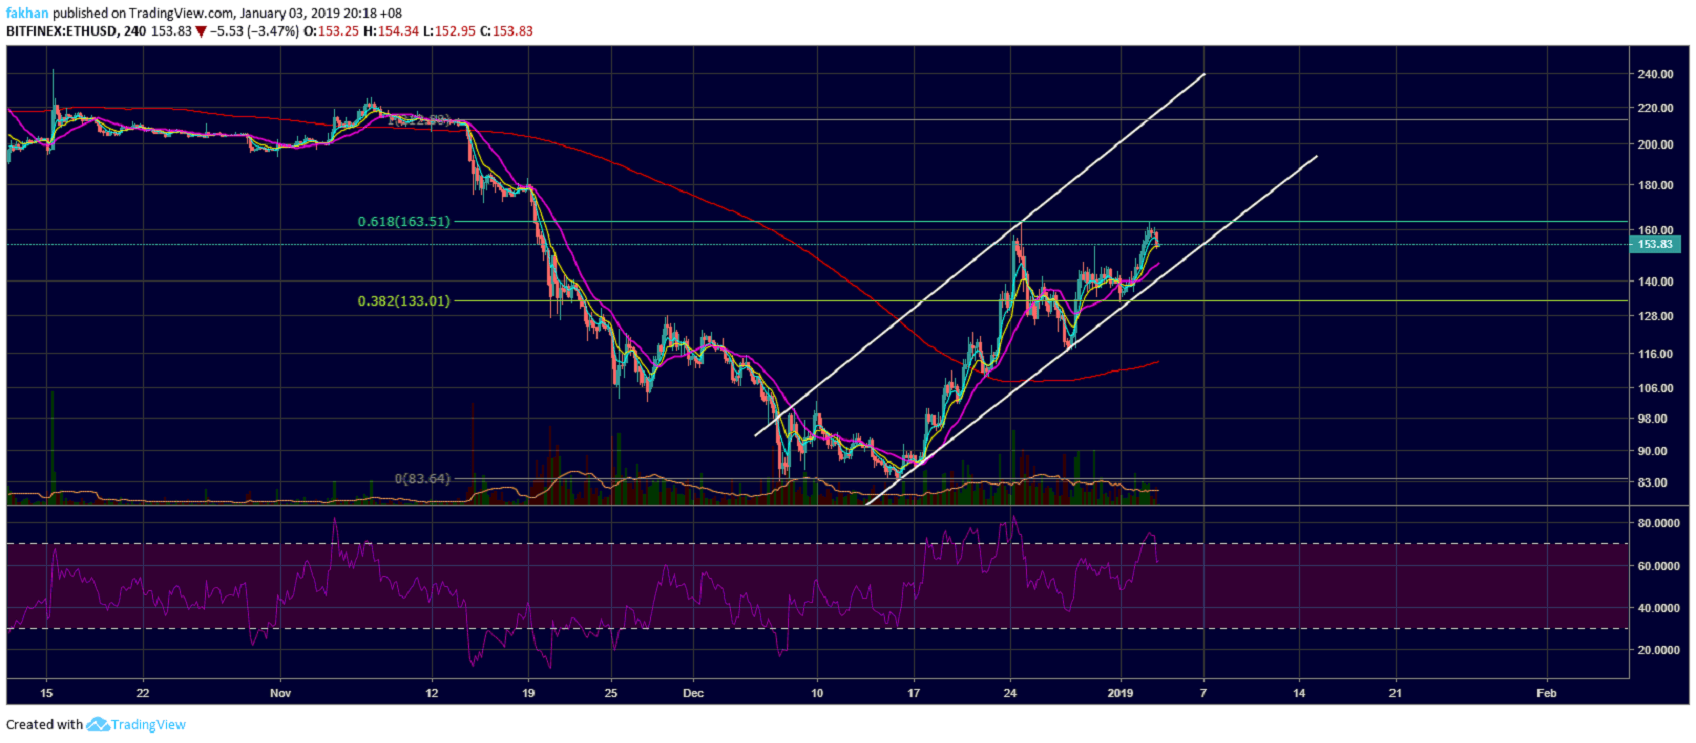 Ethereum (ETH) Likely To Trade Sideways Before Its Next Decisive Move